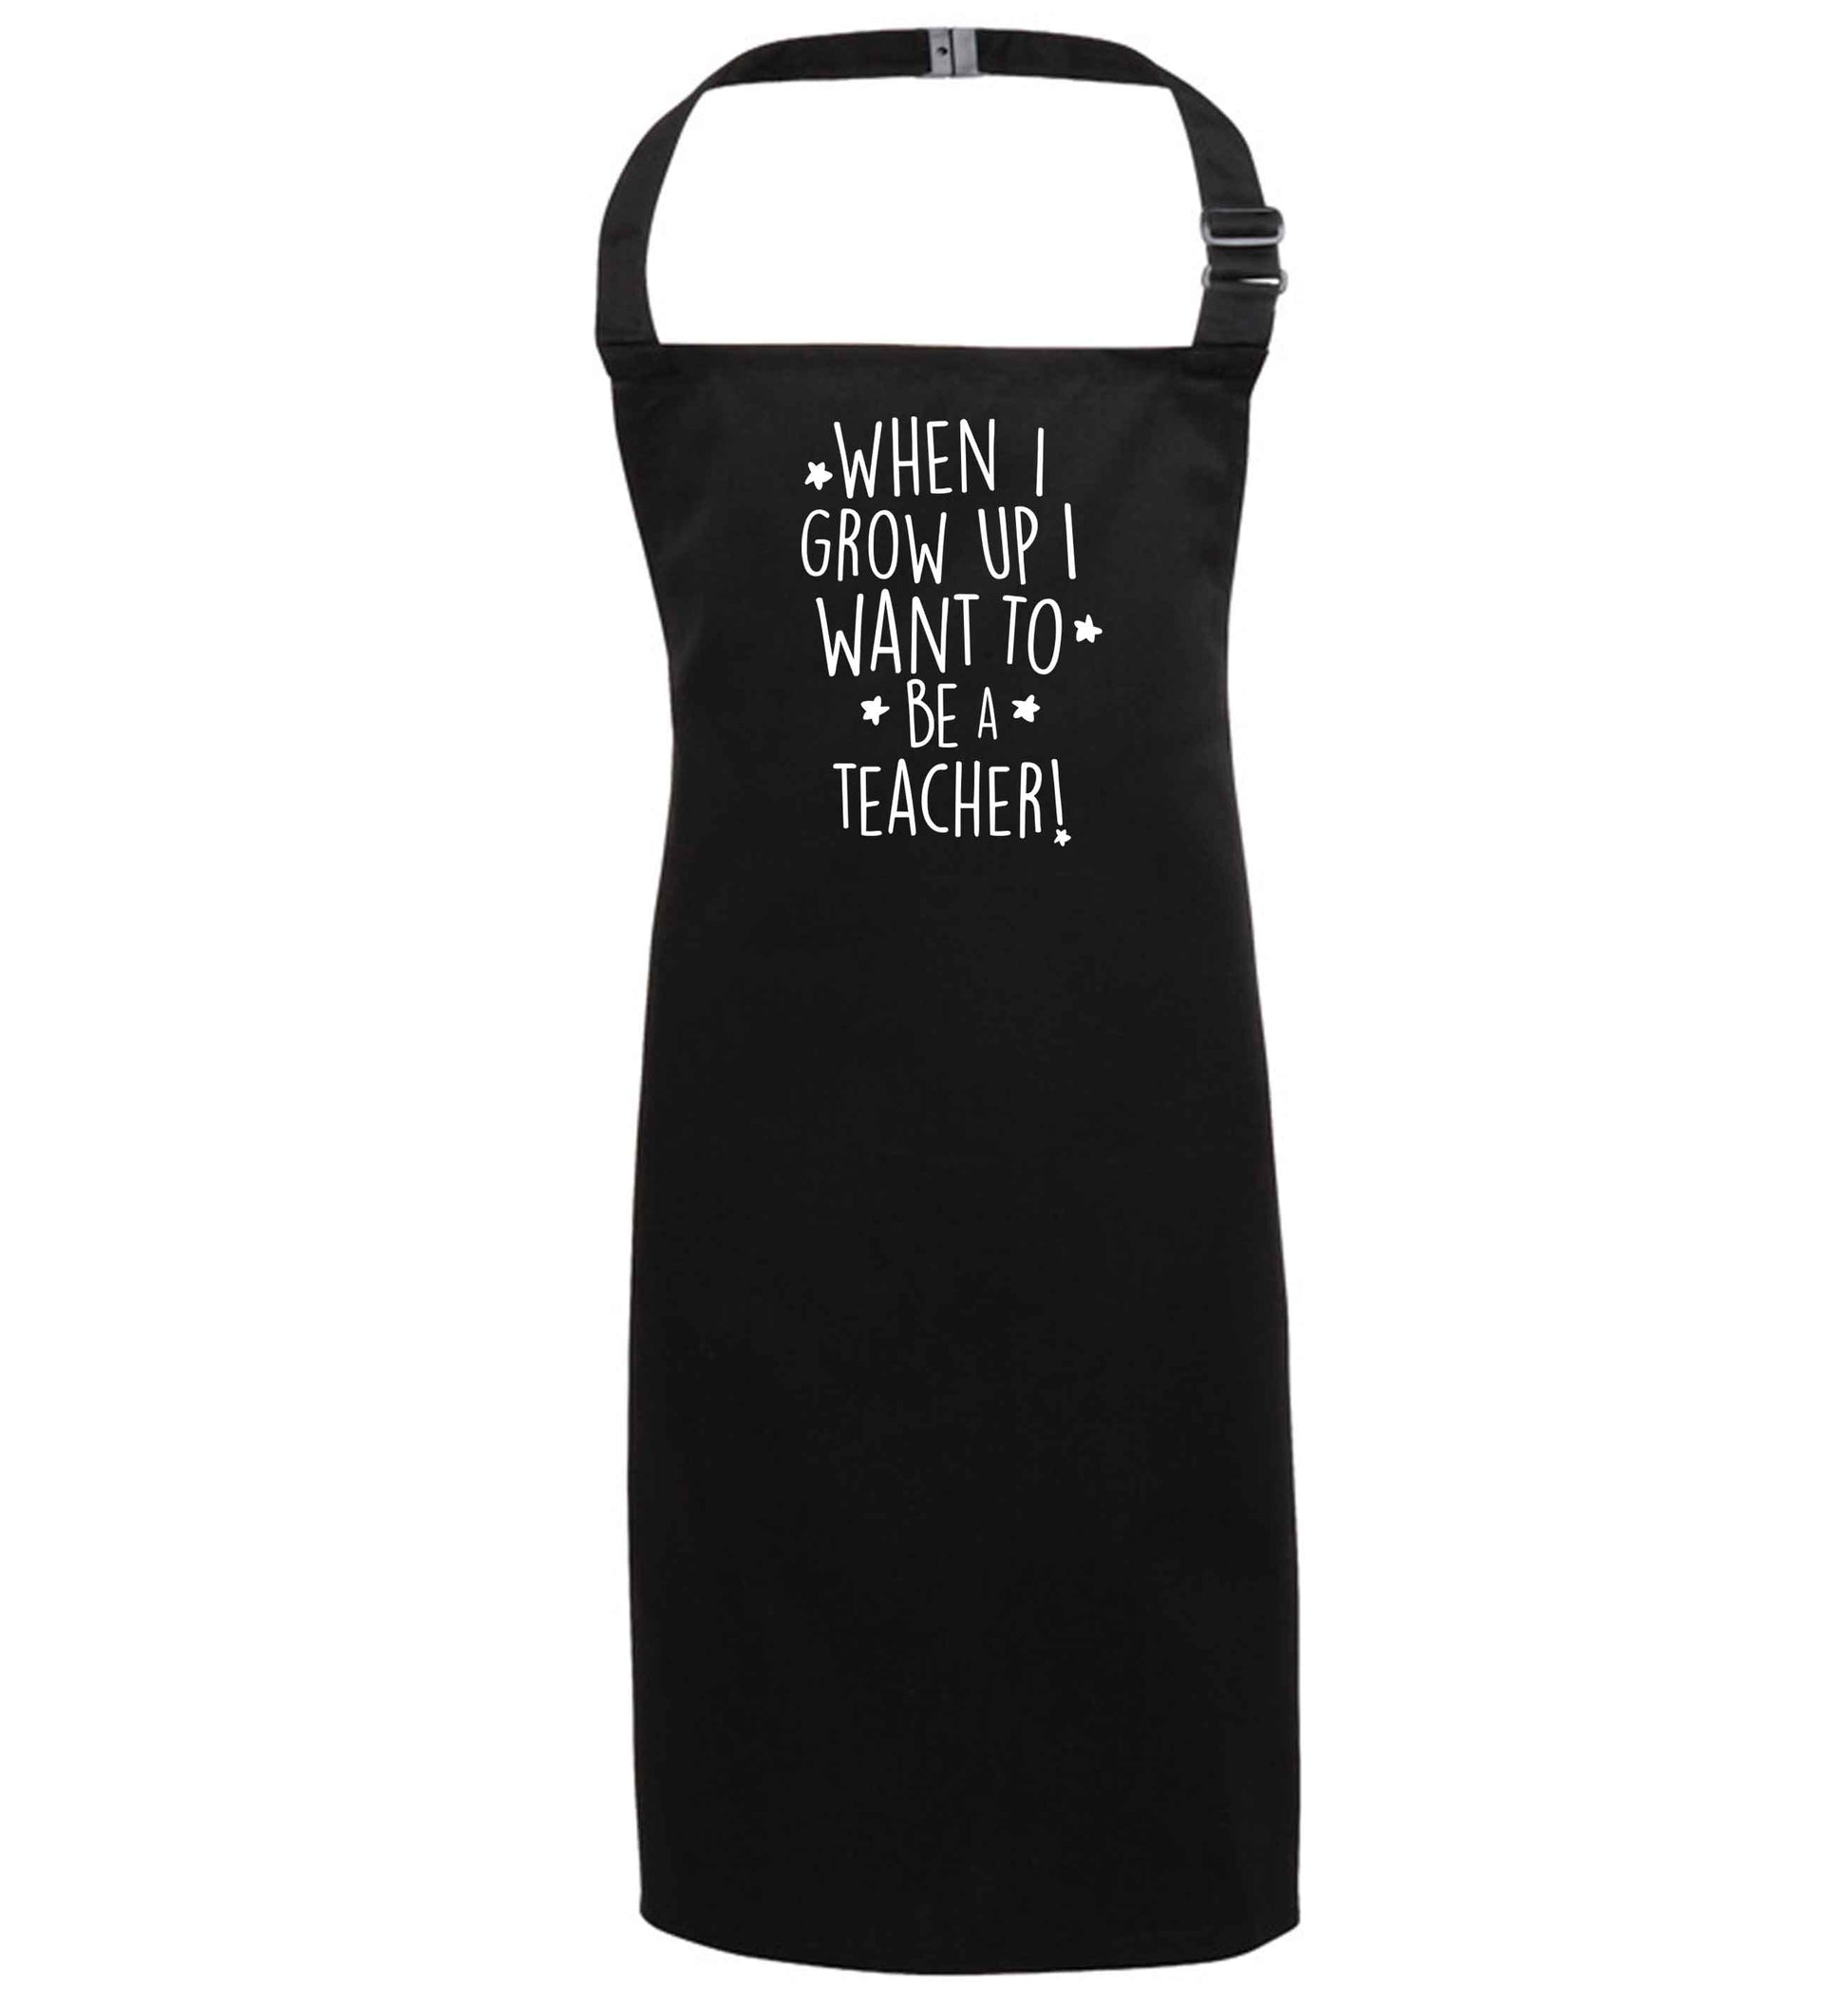 When I grow up I want to be a teacher black apron 7-10 years